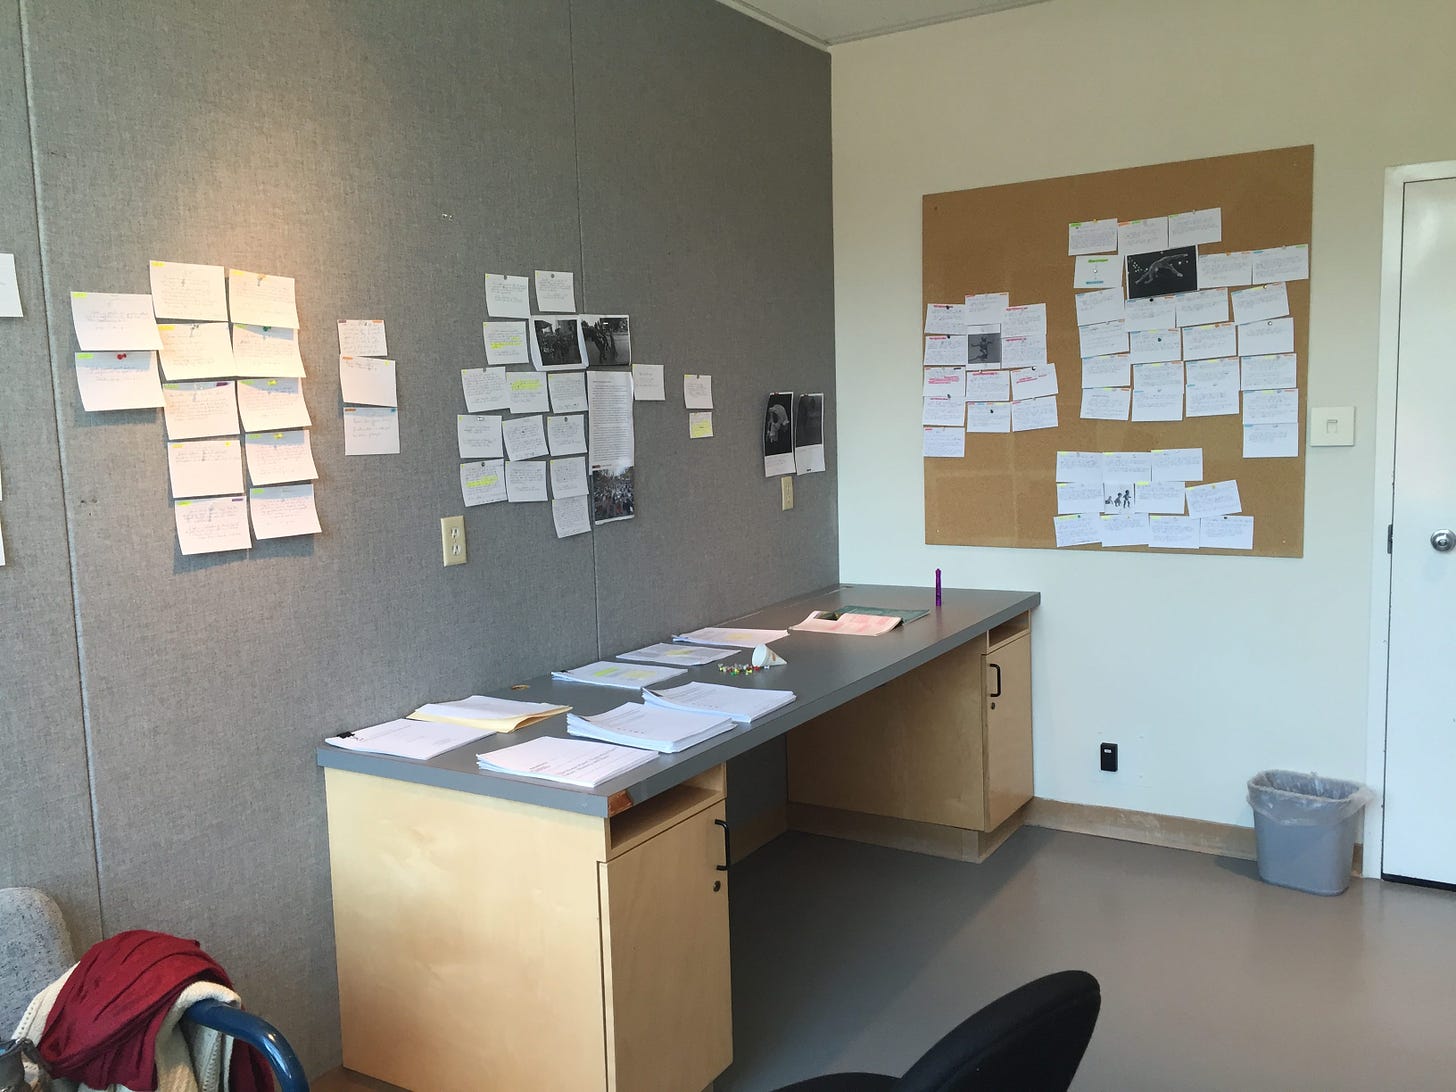 Photo of two walls of a room and a desk in front; the walls have index cards pinned all over them (one wall is fabric and the other has a bulletin board), and the desk is covered in tidy stacks of papers